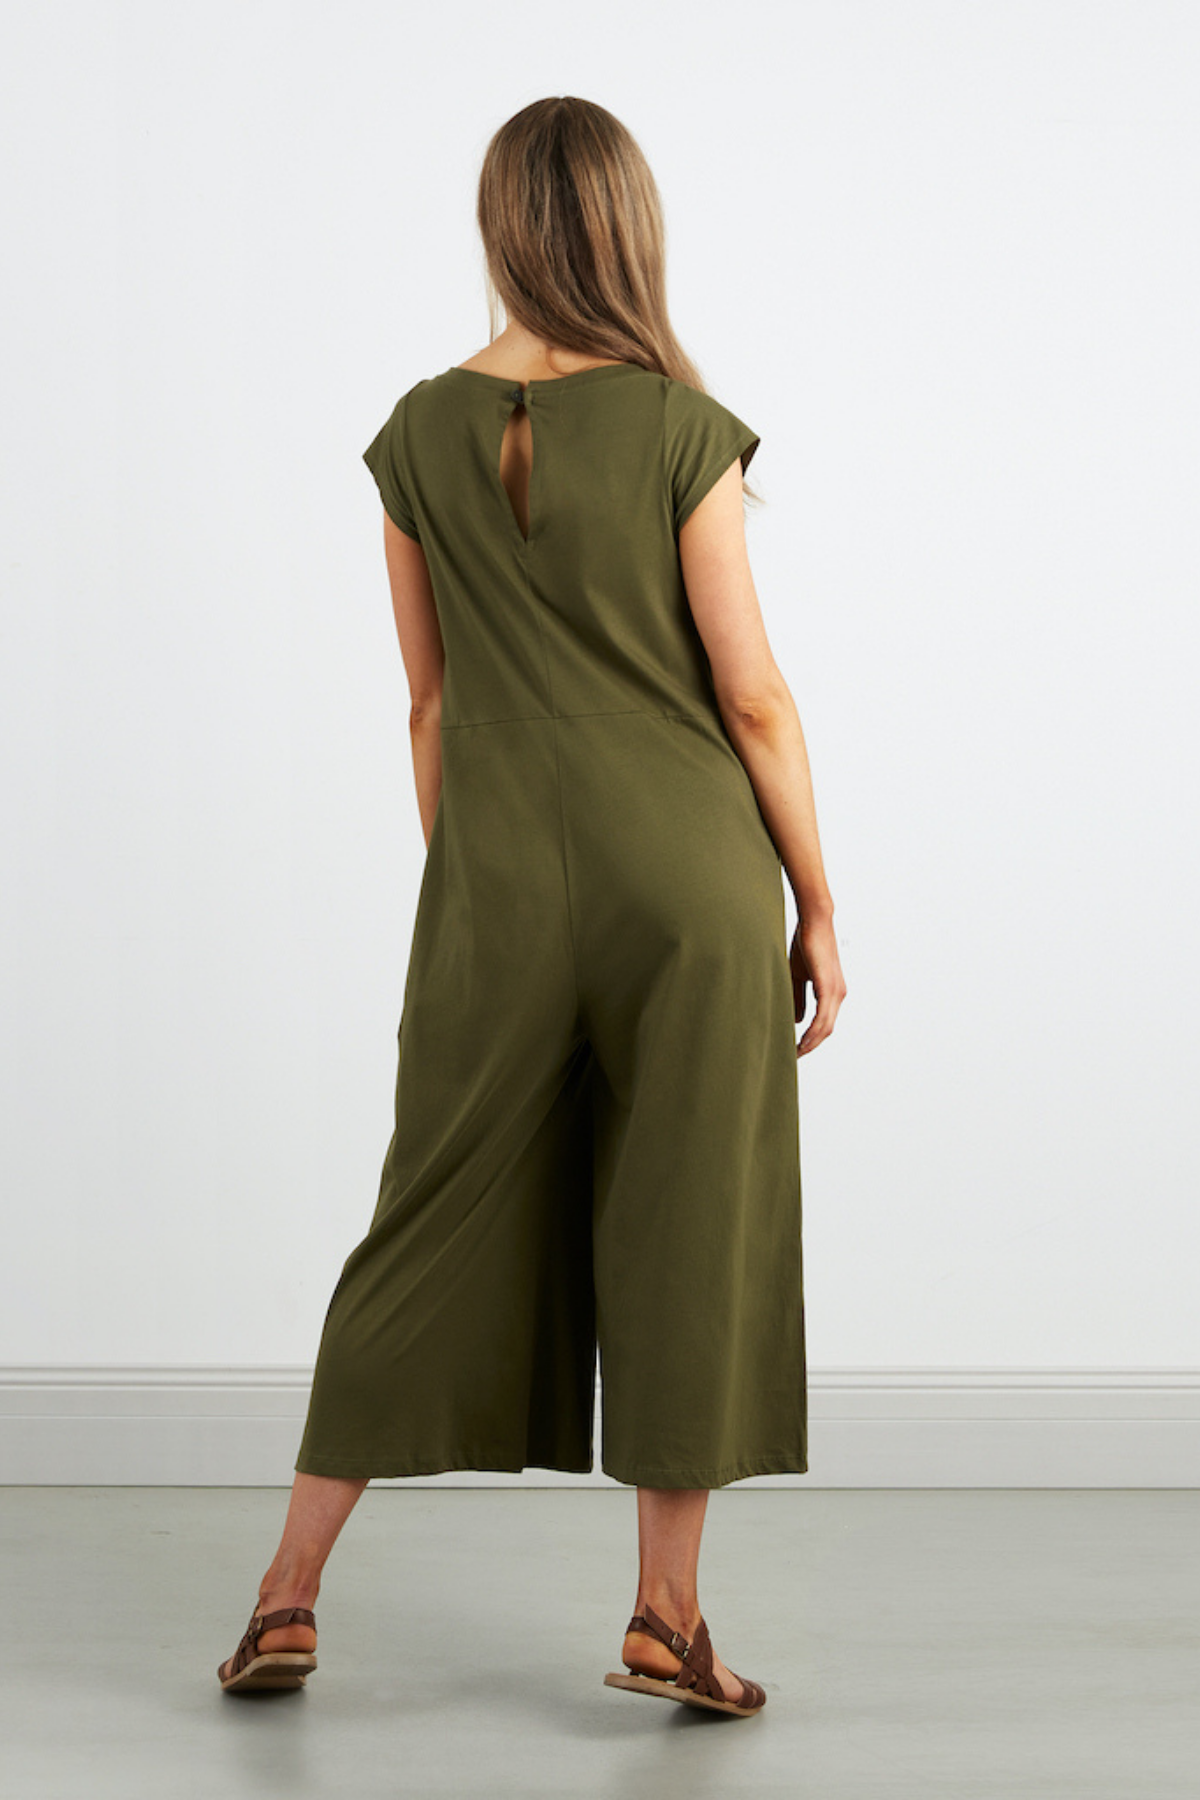 Dorsu Wide Leg Jumpsuit in Olive, available on ZERRIN with free Singapore shipping